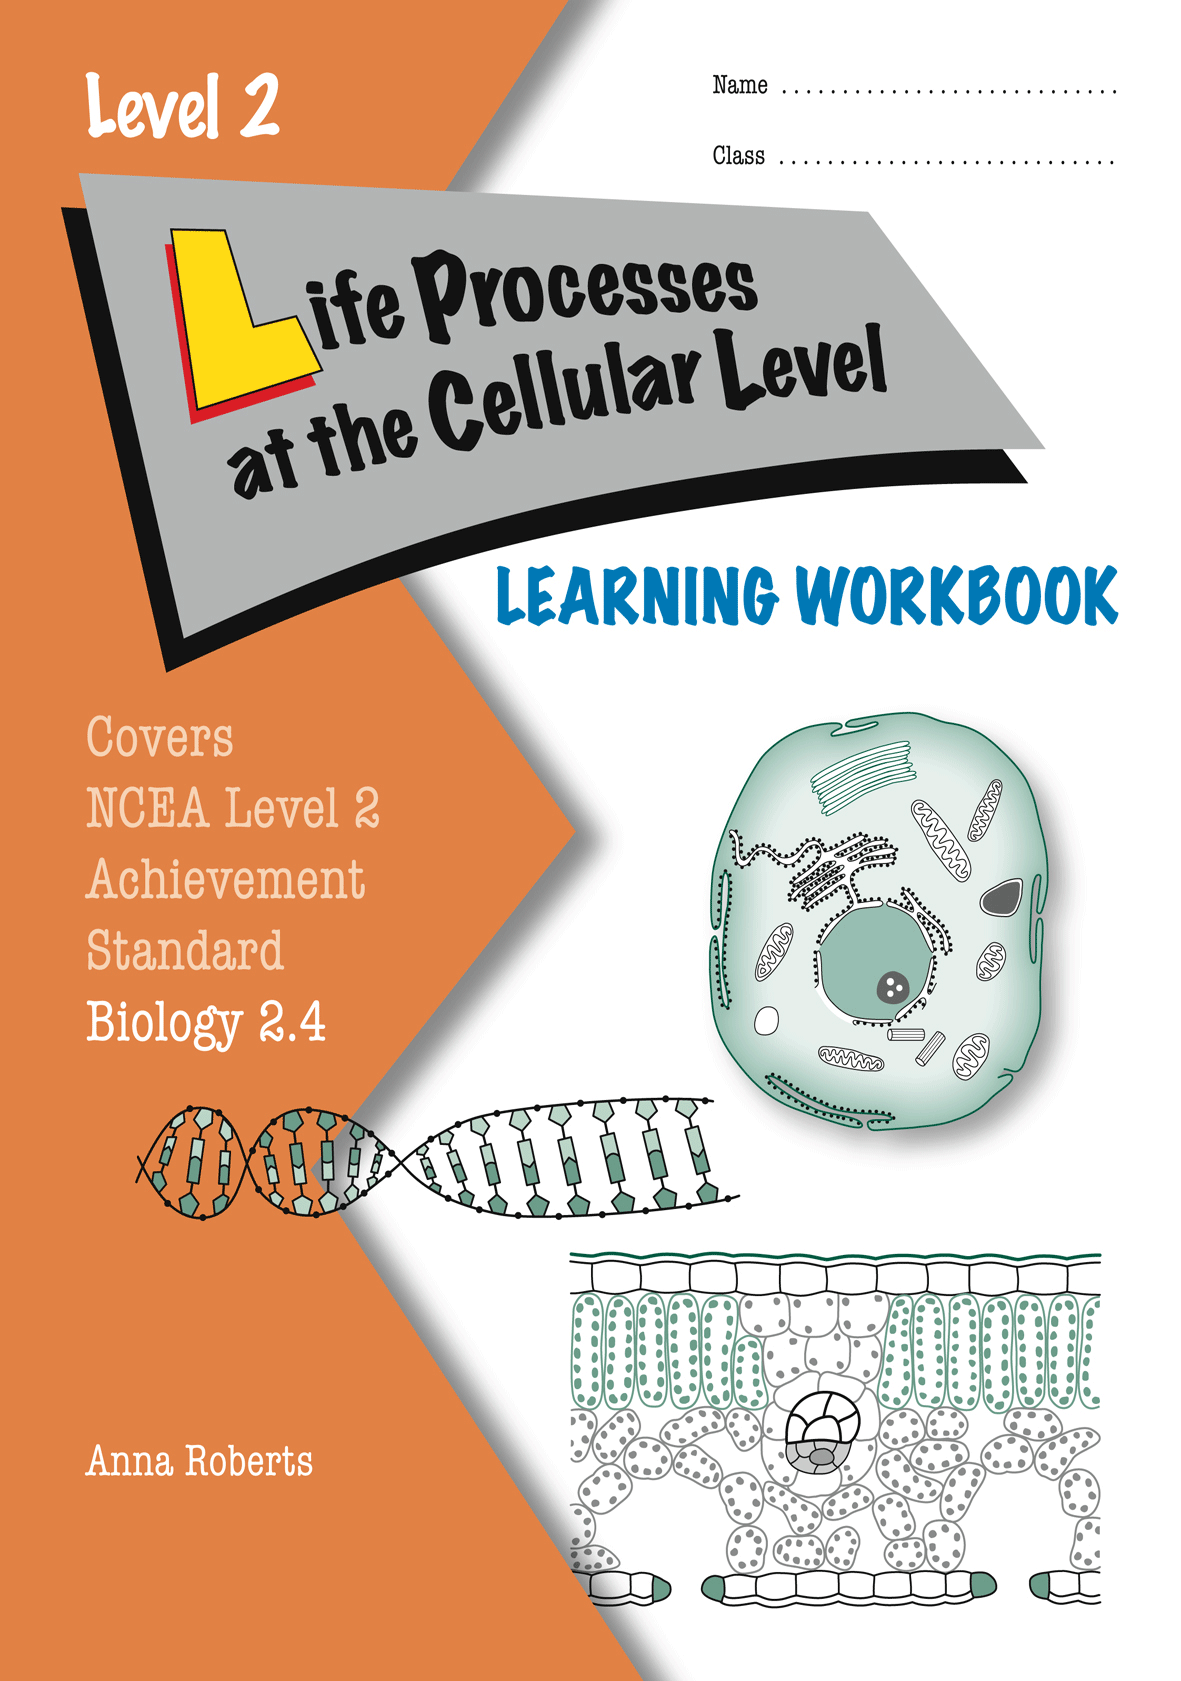 Level 2 Life Processes at the Cellular Level 2.4 Learning Workbook